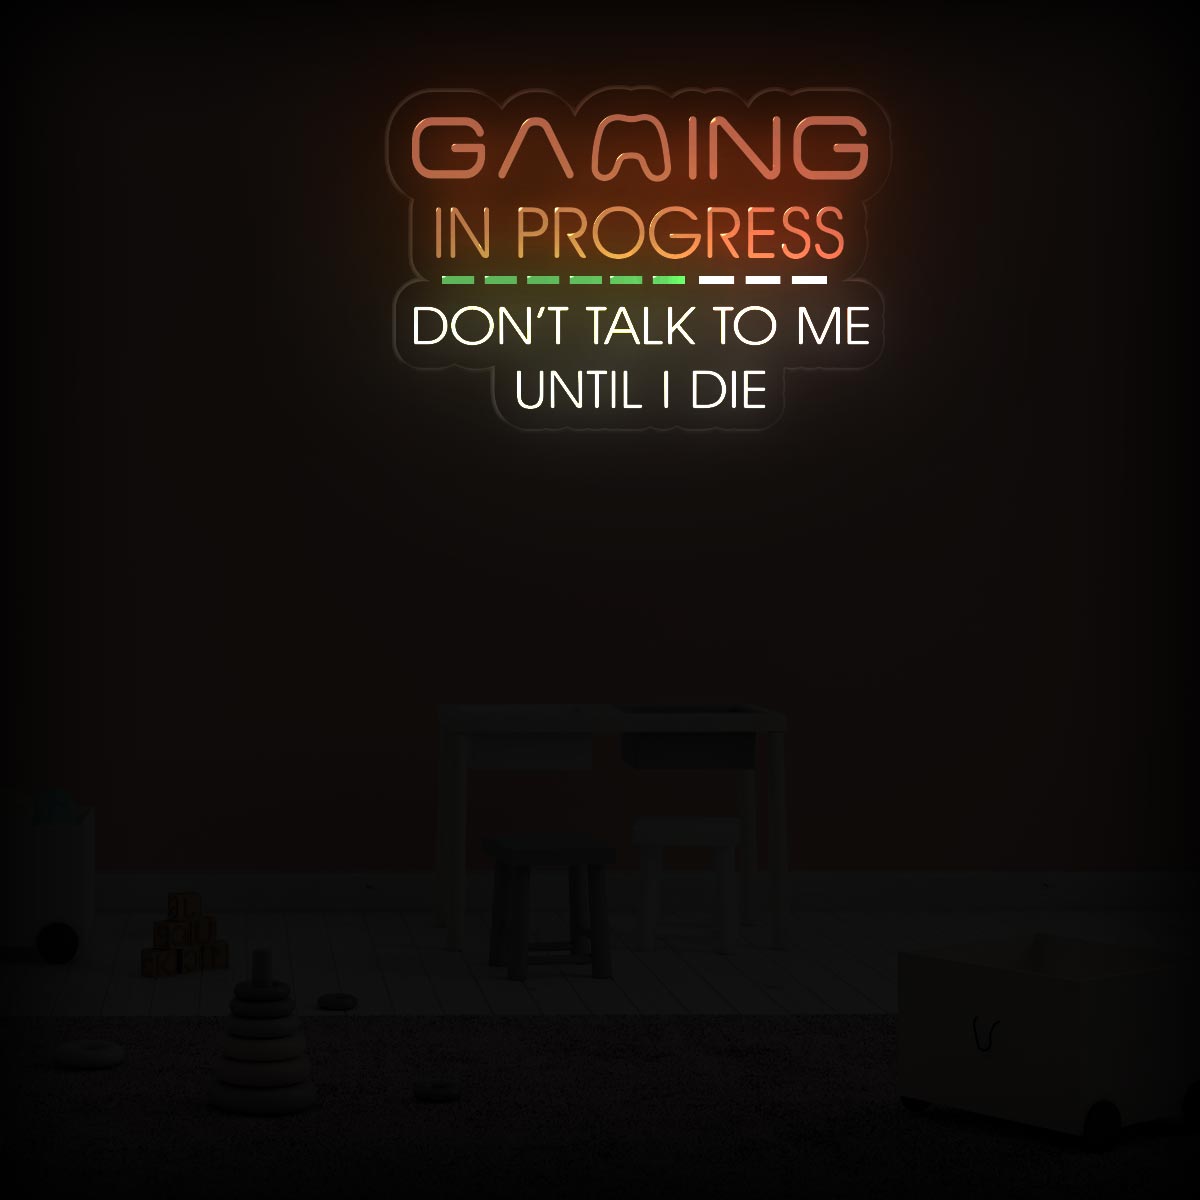 Gaming In Progress. Don't Talk To Me Until I Die - Funny Game Room Sign - NEONXPERT